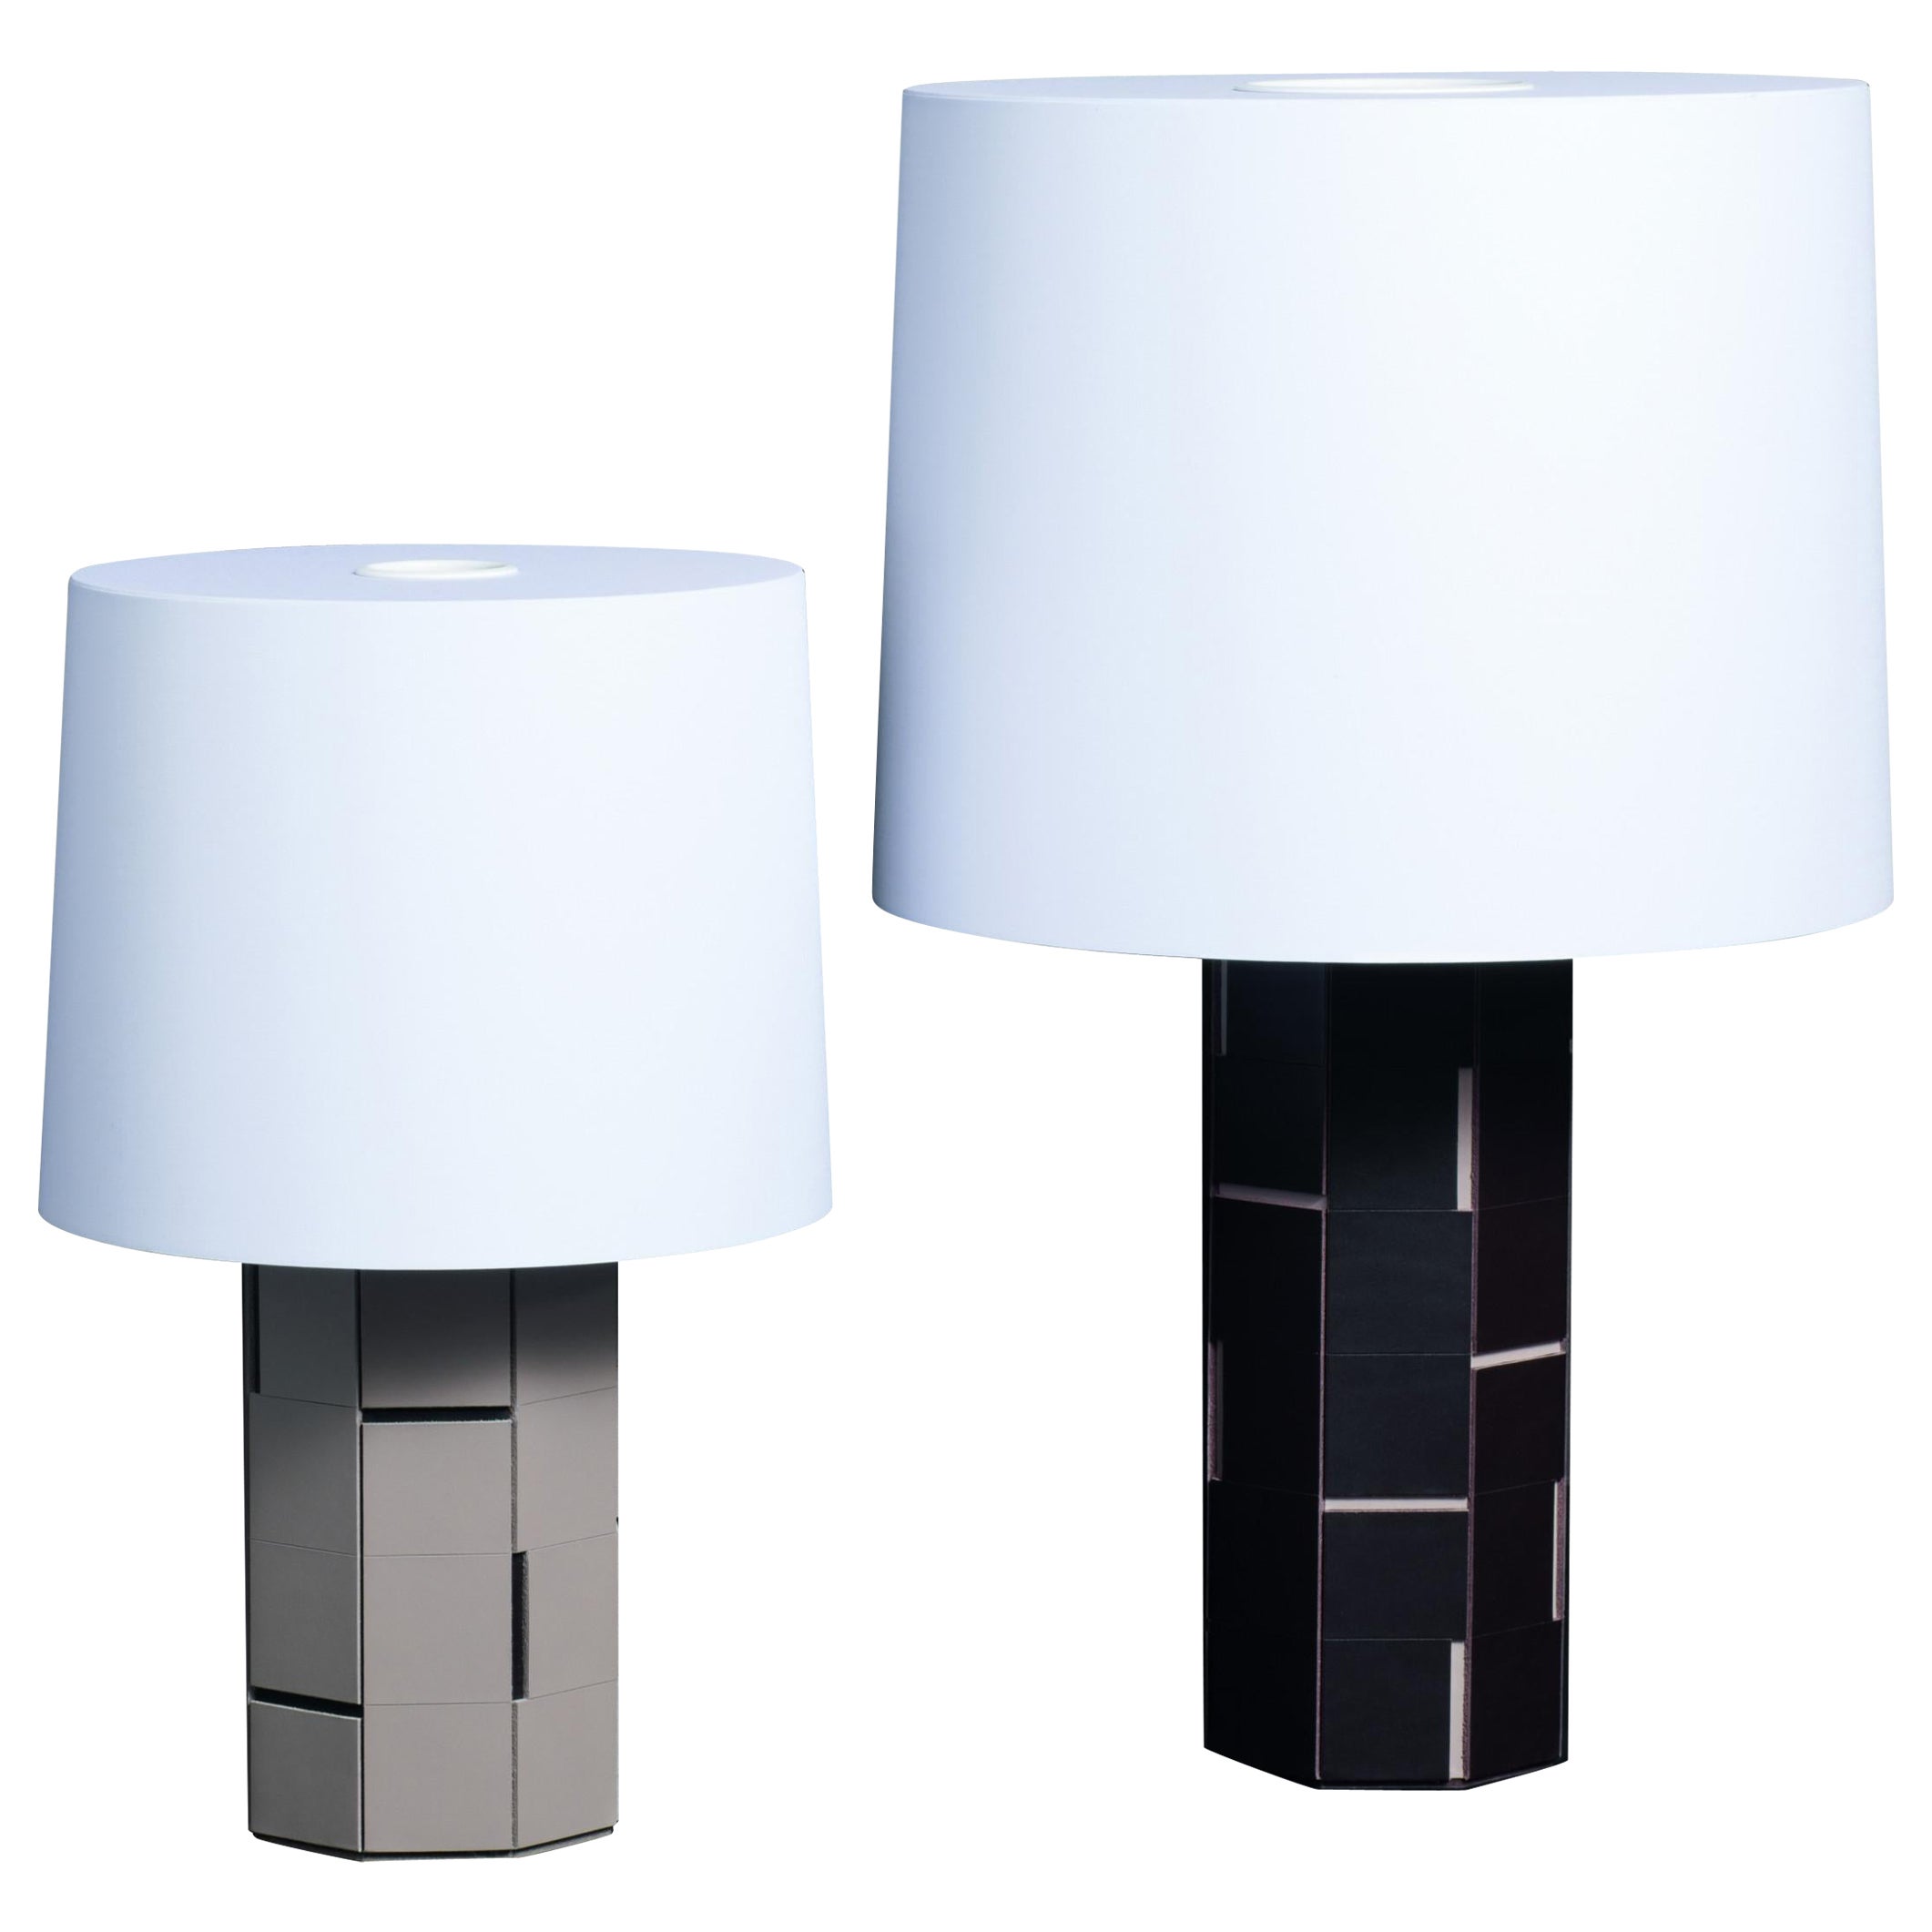 Atari Table Lamp Large -- Stephane Parmentier x Giobagnara

Available only in saddle leather. See photo for recommended color combinations.

Embracing sleek designs and beautiful materials, the Stephane Parmentier Collection for Giobagnara